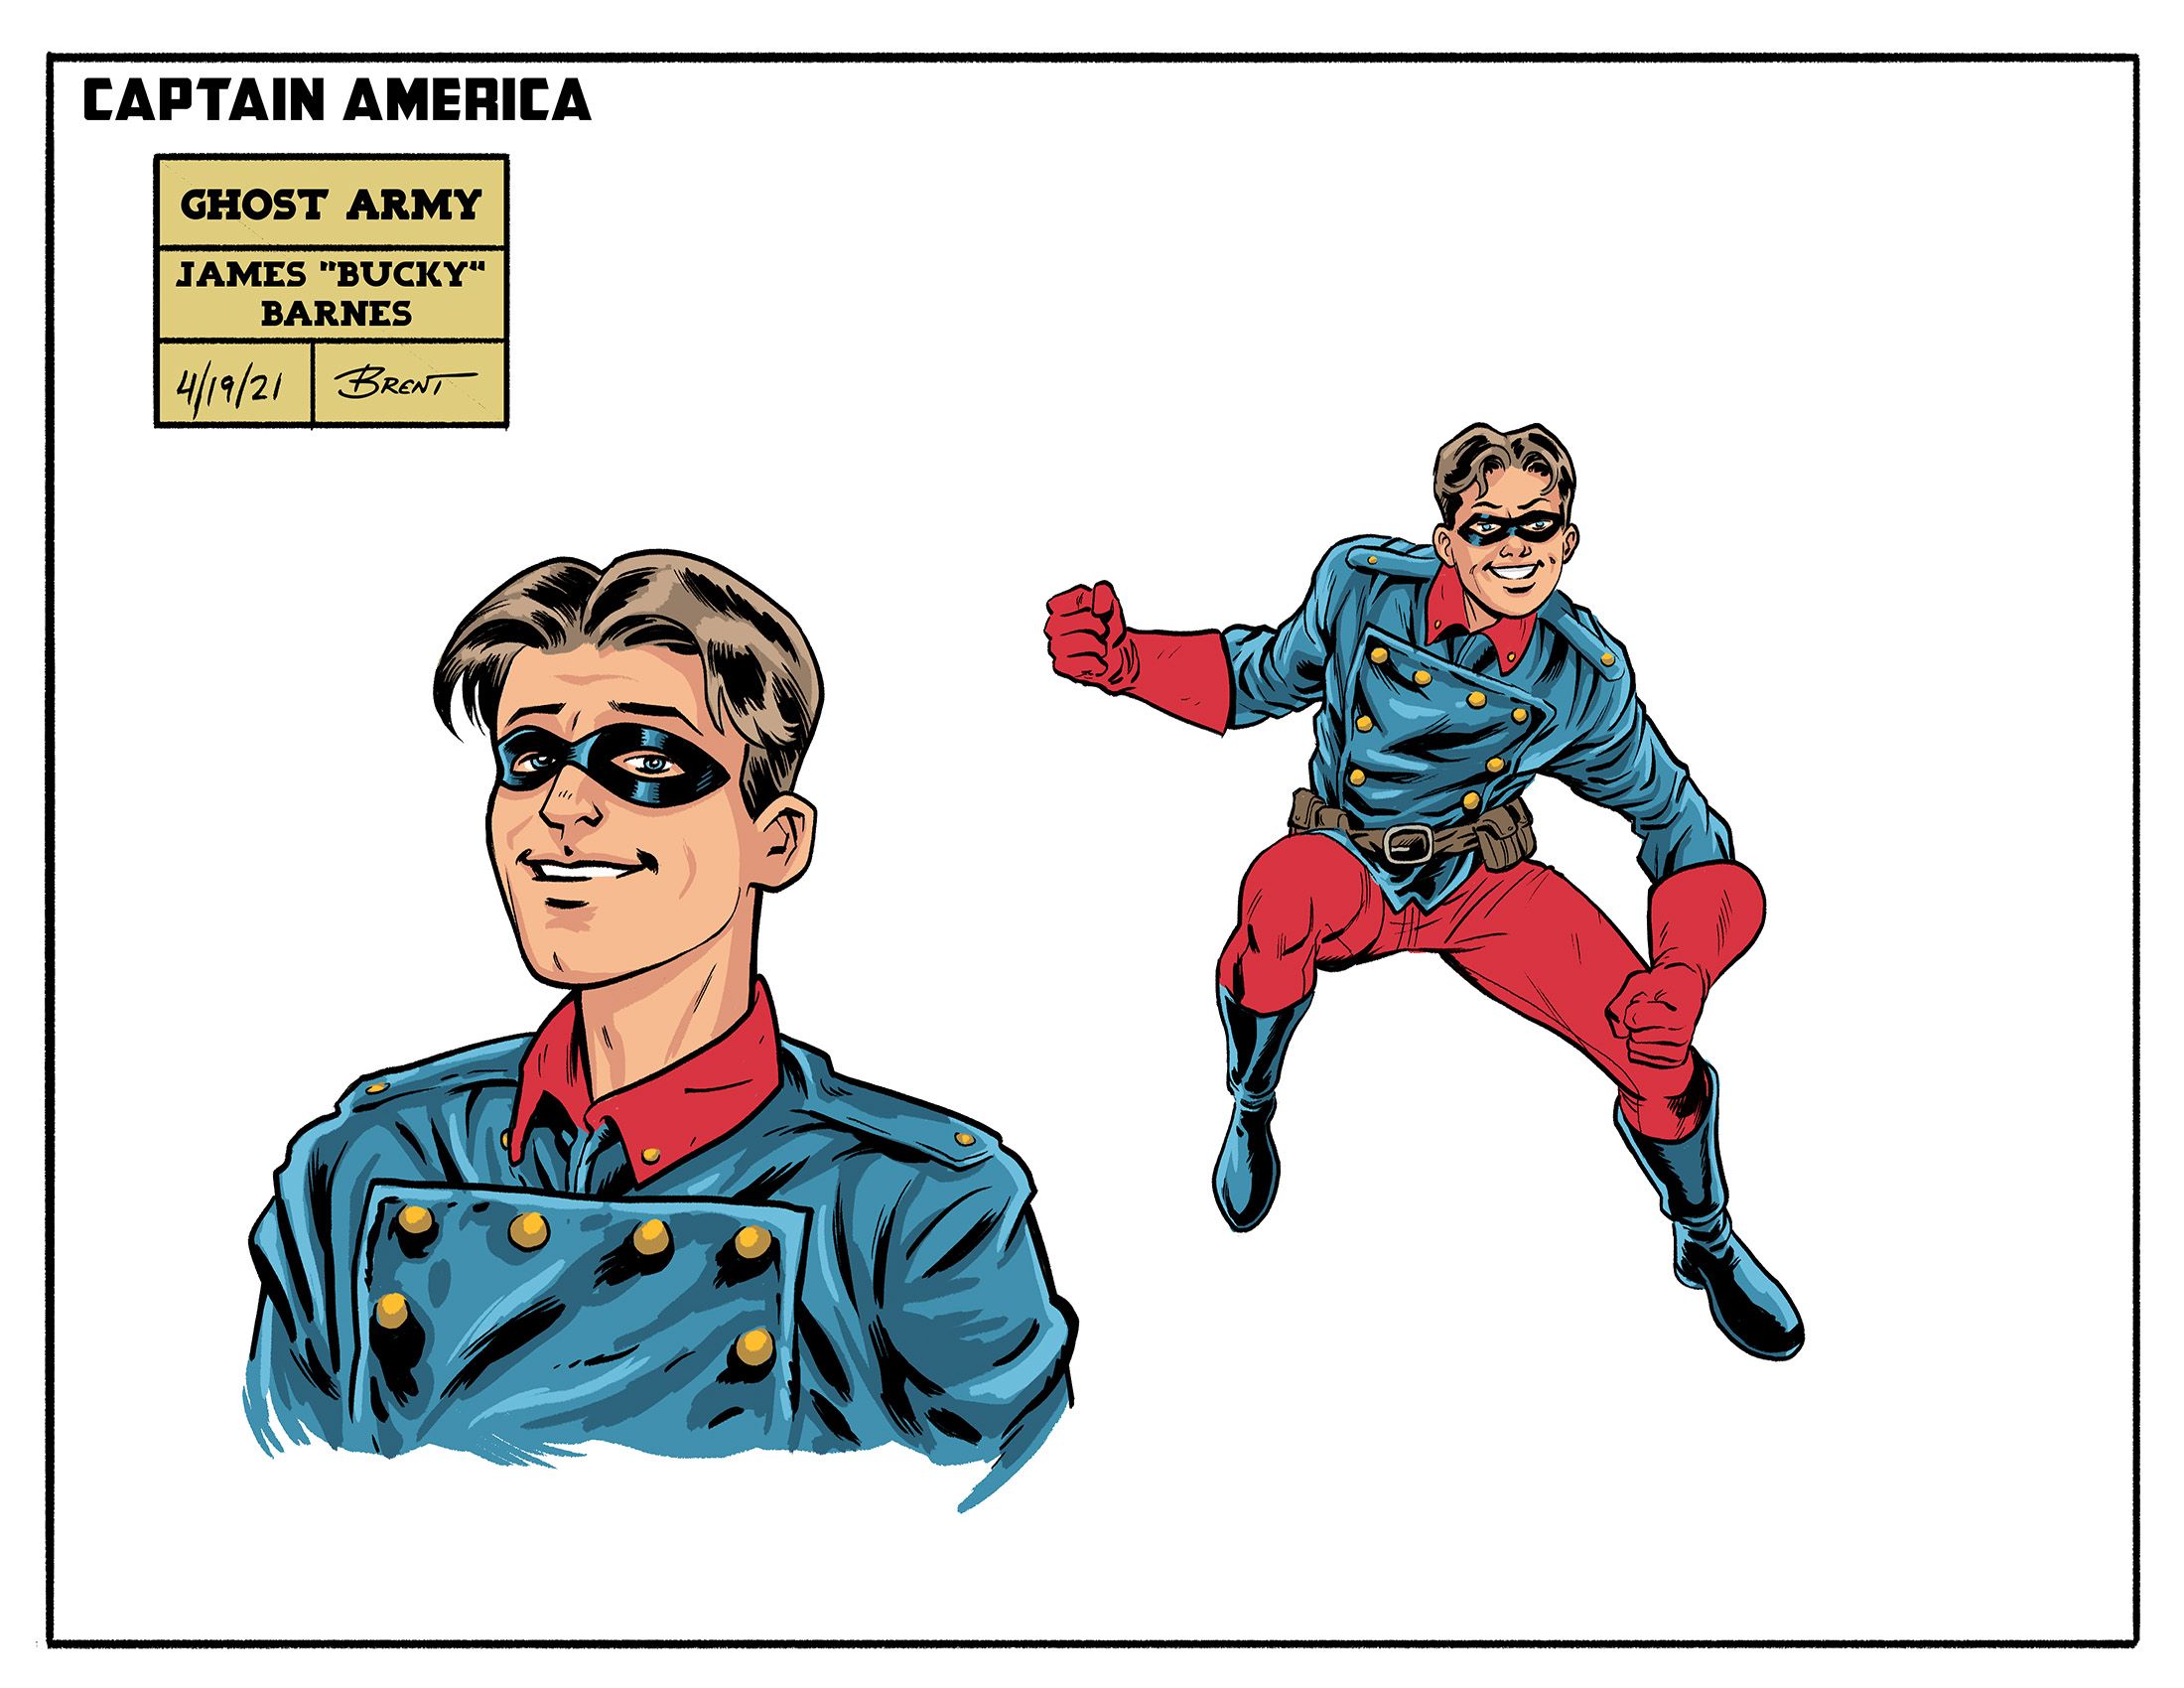 Captain America: The Ghost Army character sketch of Bucky Barnes